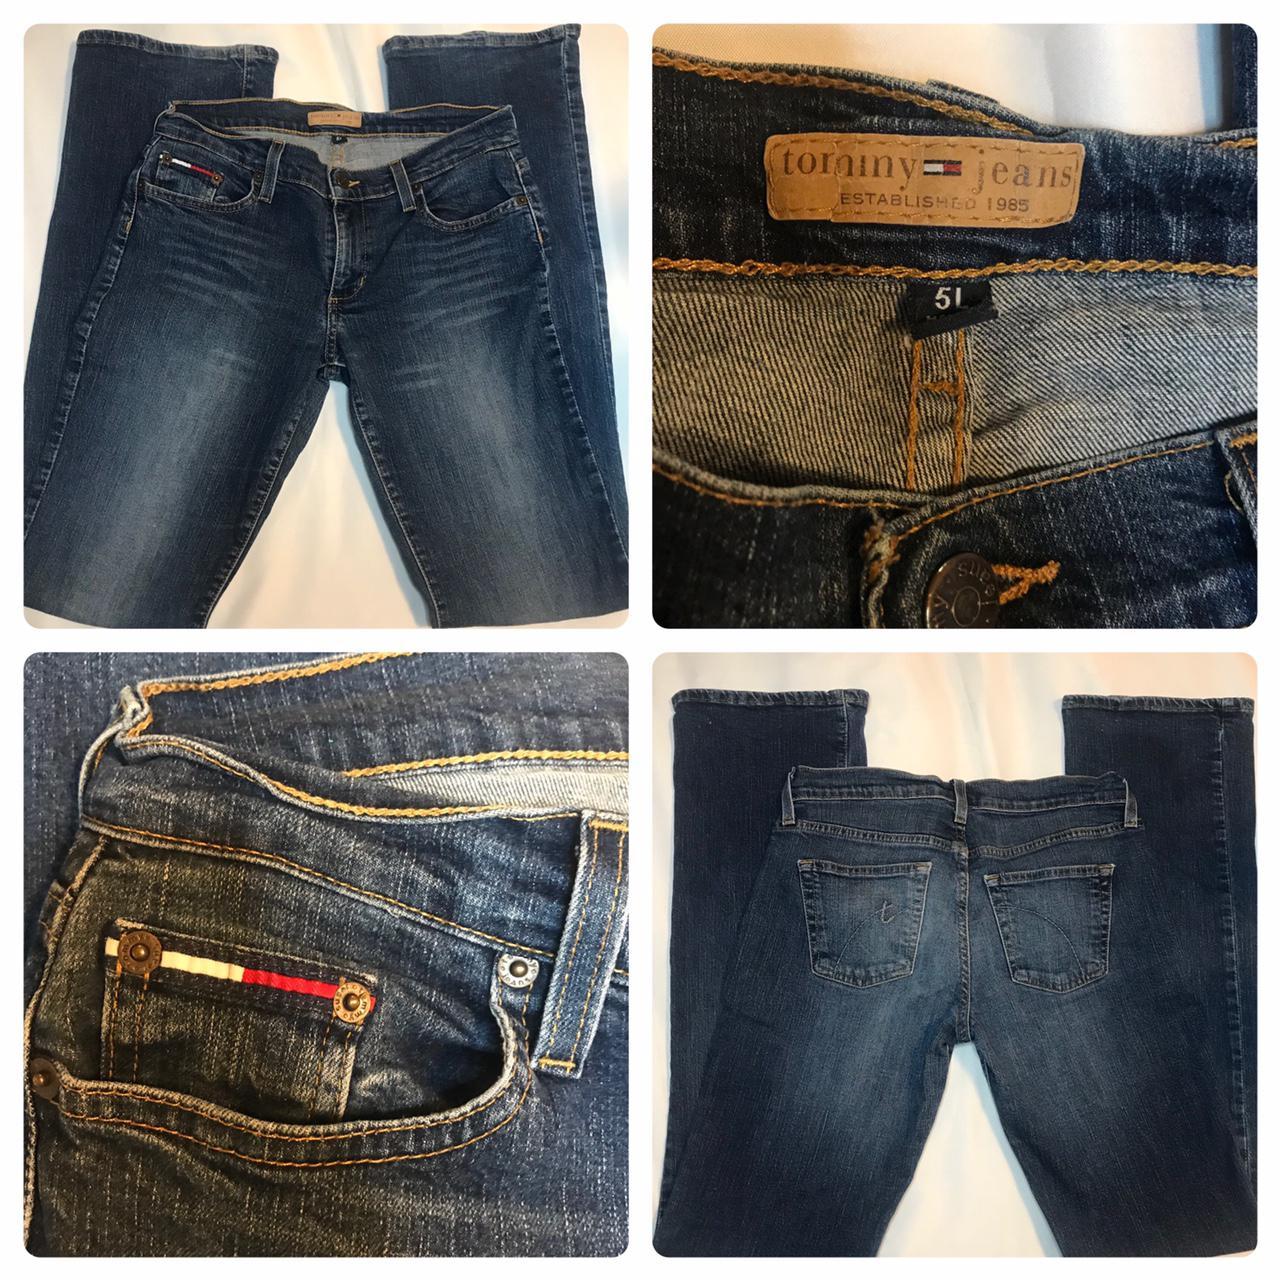 Tommy Hilfiger Women's Navy and Blue Jeans (4)